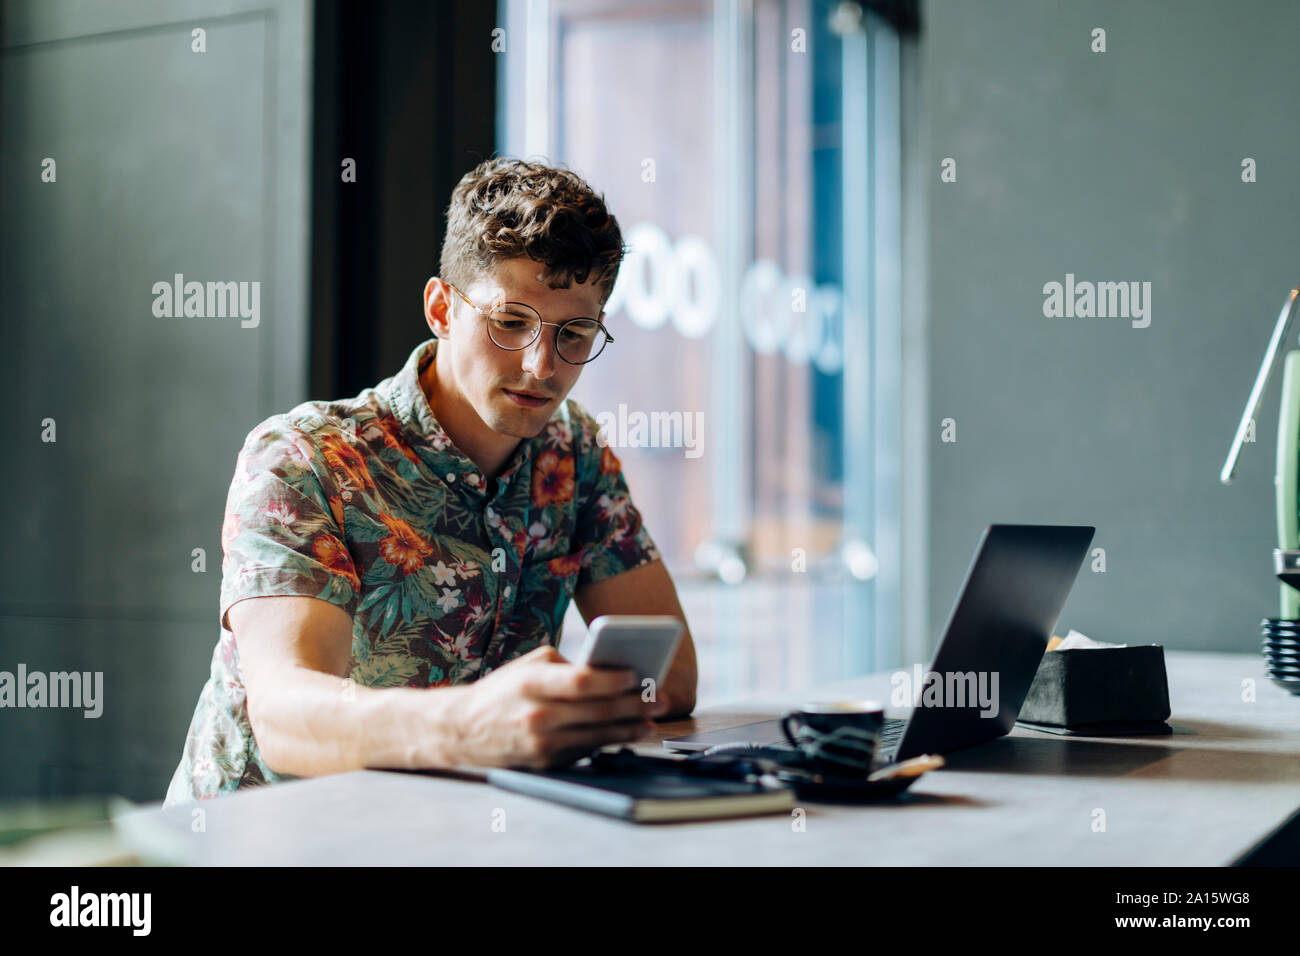 Young man sitting in cafe, using samrtphone and laptop Stock Photo